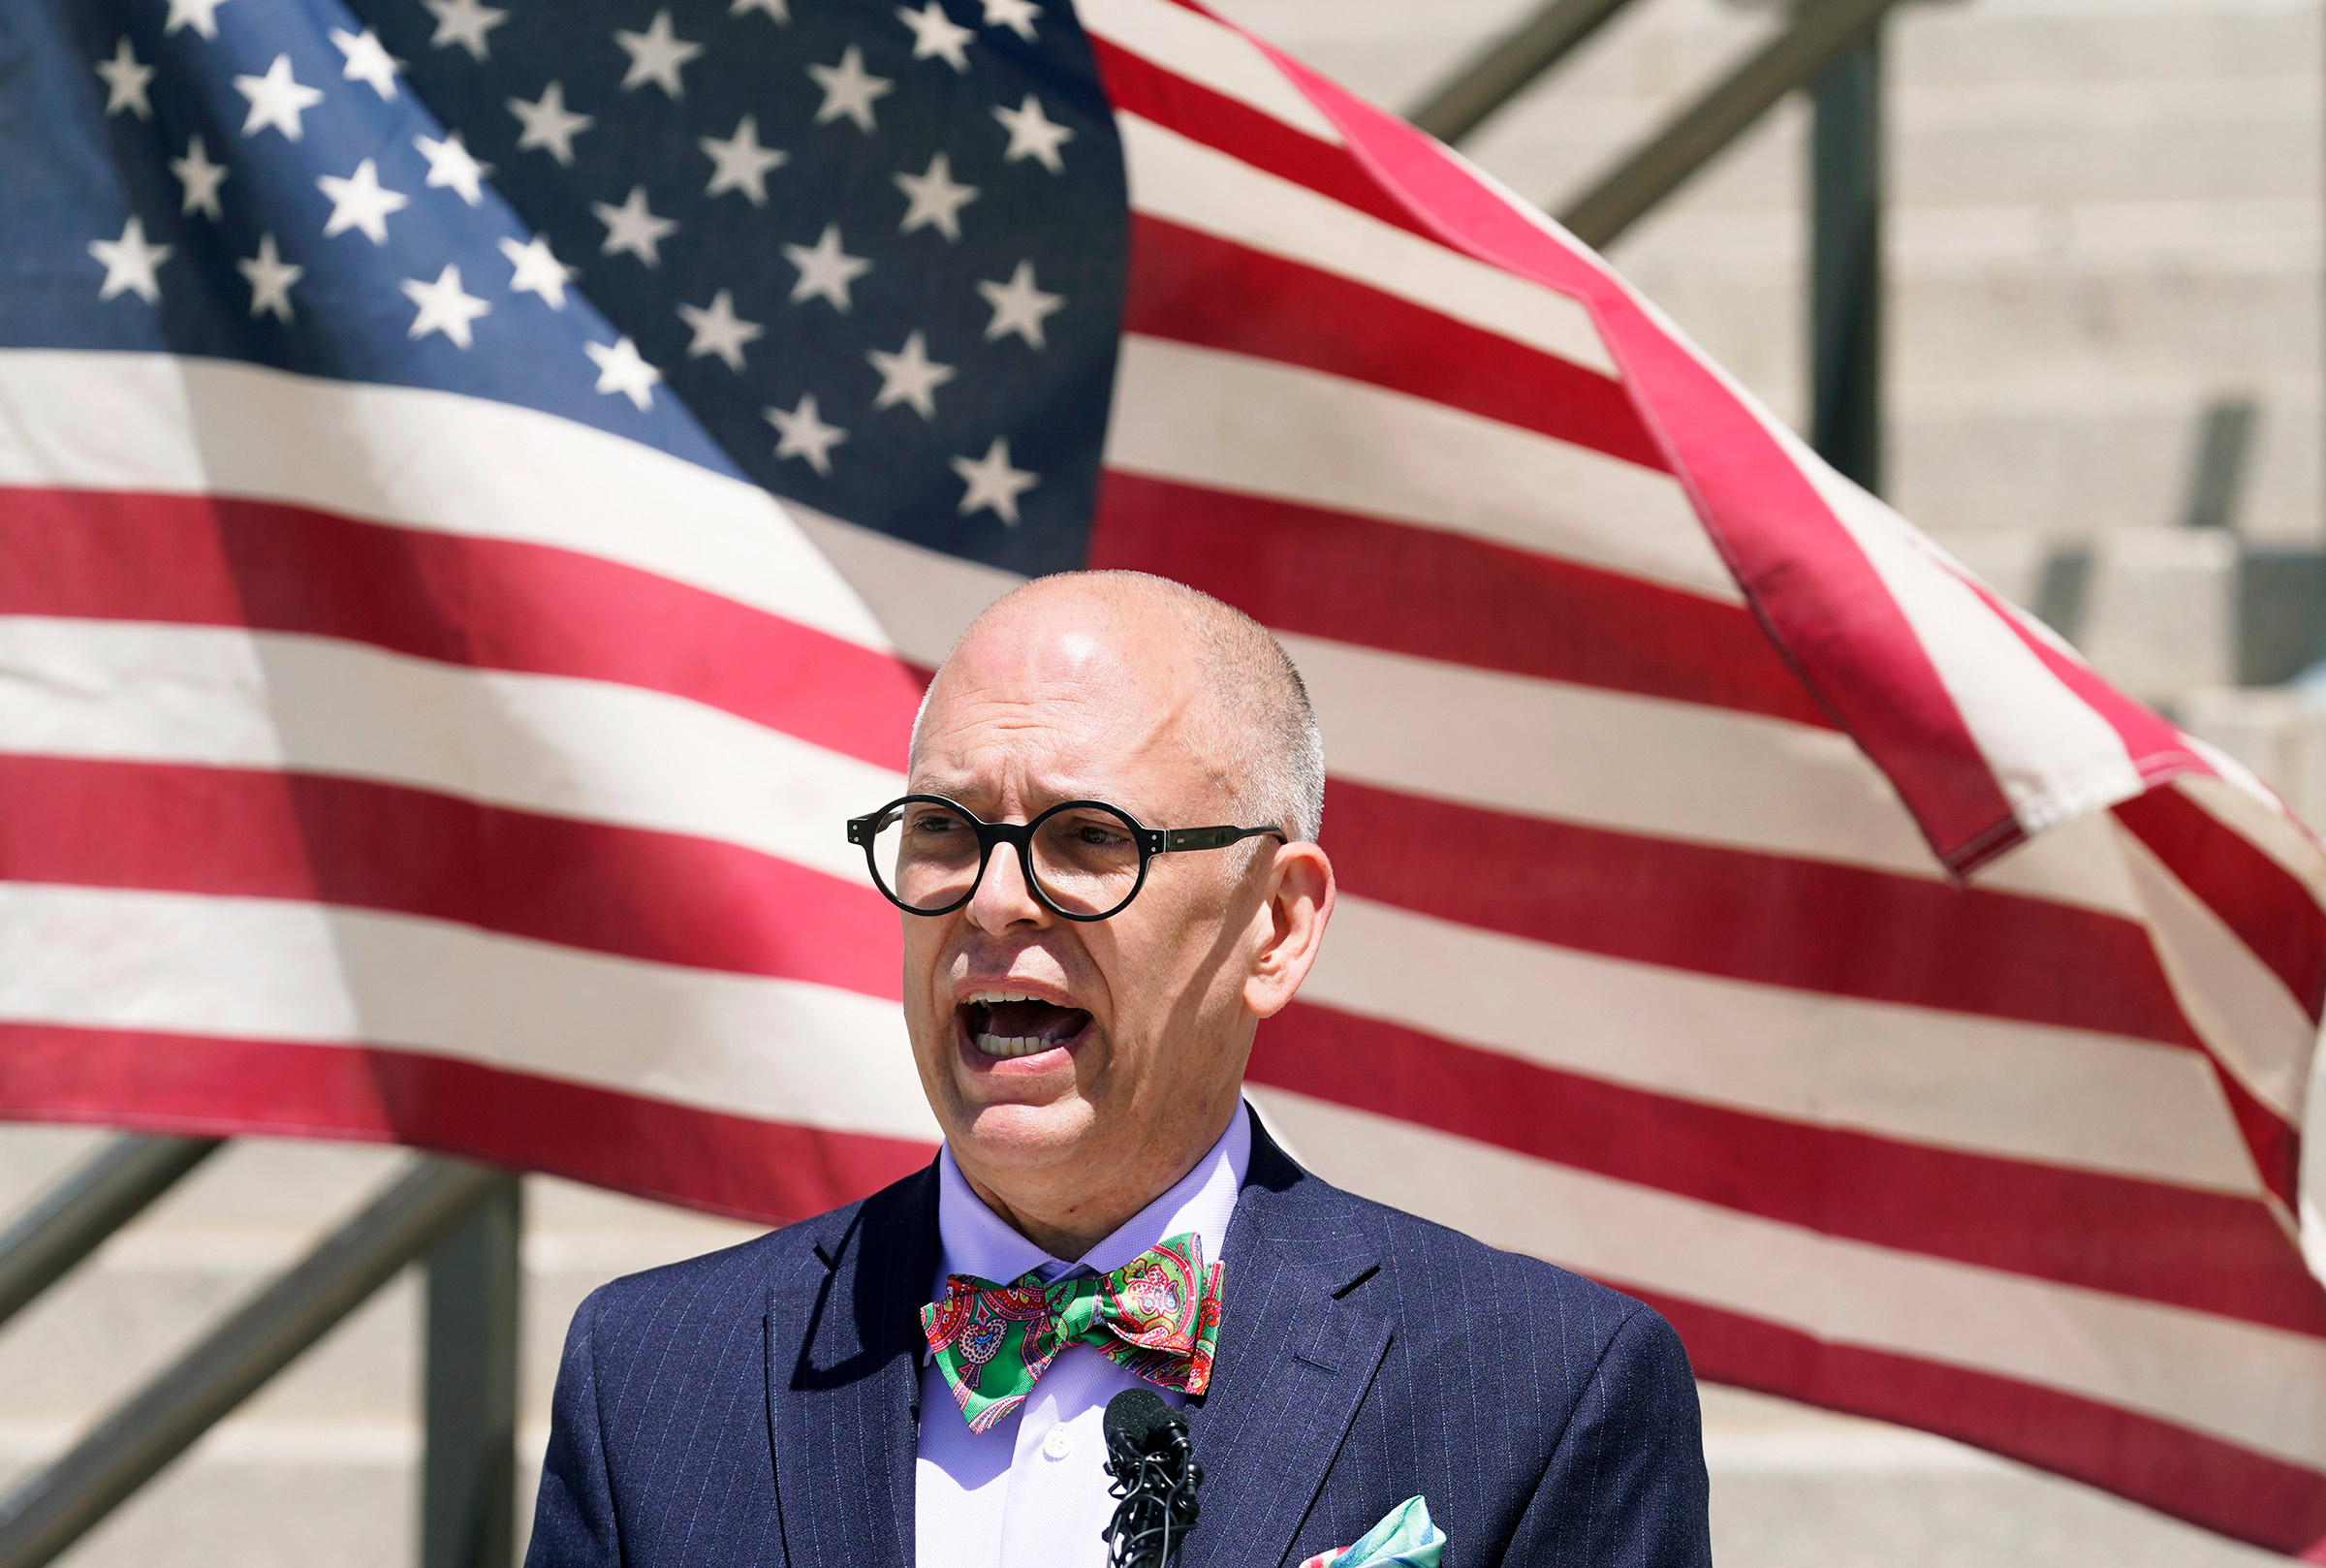 Jim Obergefell speaks during a news conference at the Utah State Capitol on Tuesday, June 7, 2022, in Salt Lake City. As the nation awaits a decision from the U.S. Supreme Court regarding a Mississippi law that calls for banning abortion after 15 weeks, LGBTQ advocates are pushing to codify protections for same-sex marriage in states throughout the country. (Rick Bowmer—AP)